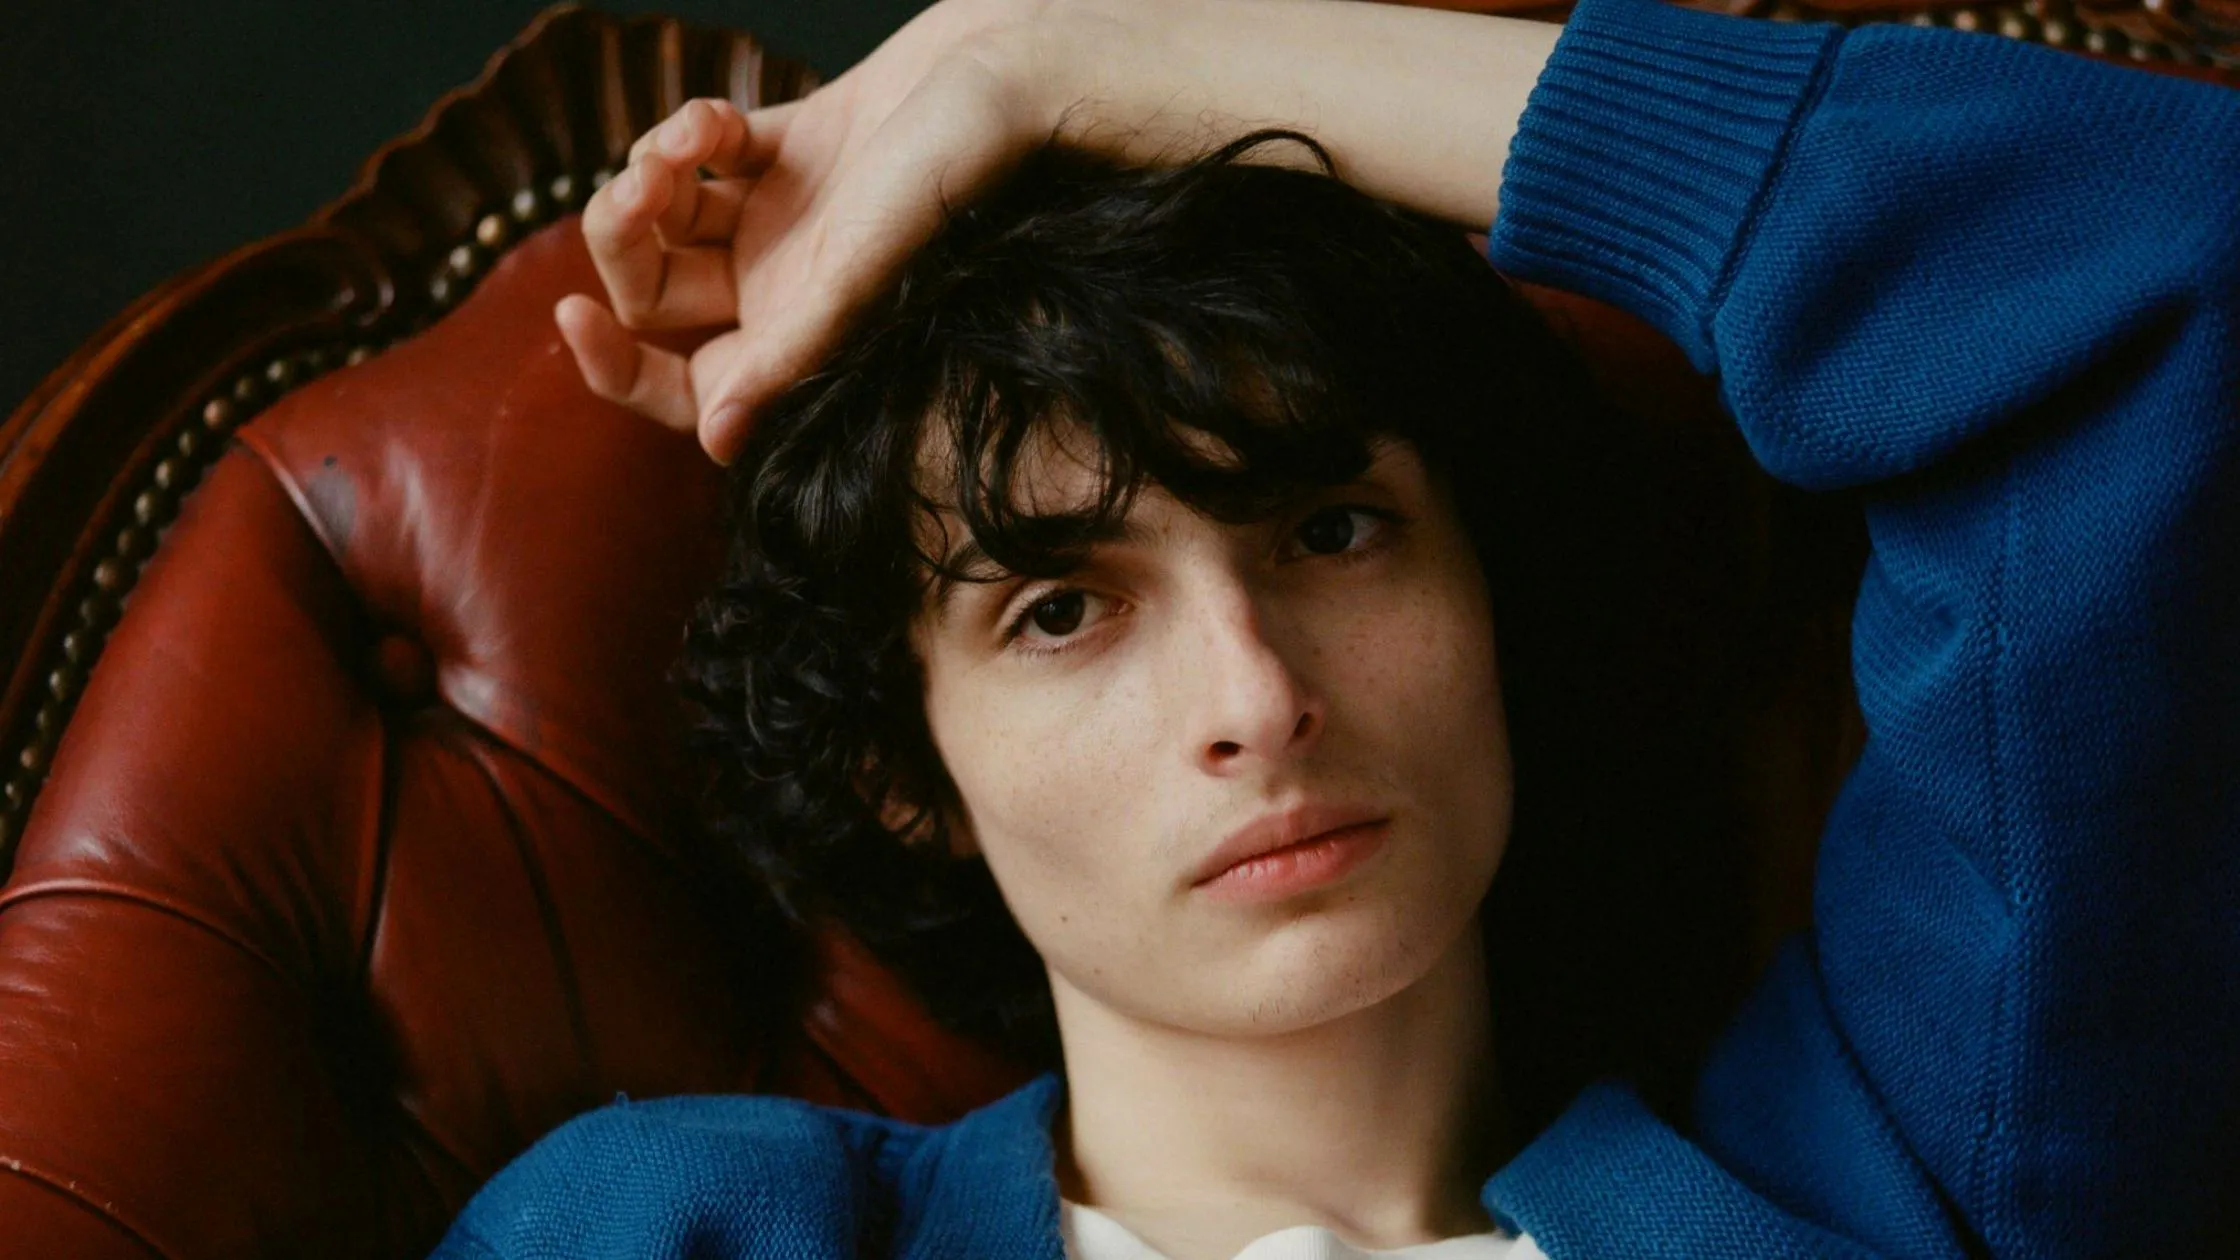 Is Finn Wolfhard Gay Sexuality Exposed